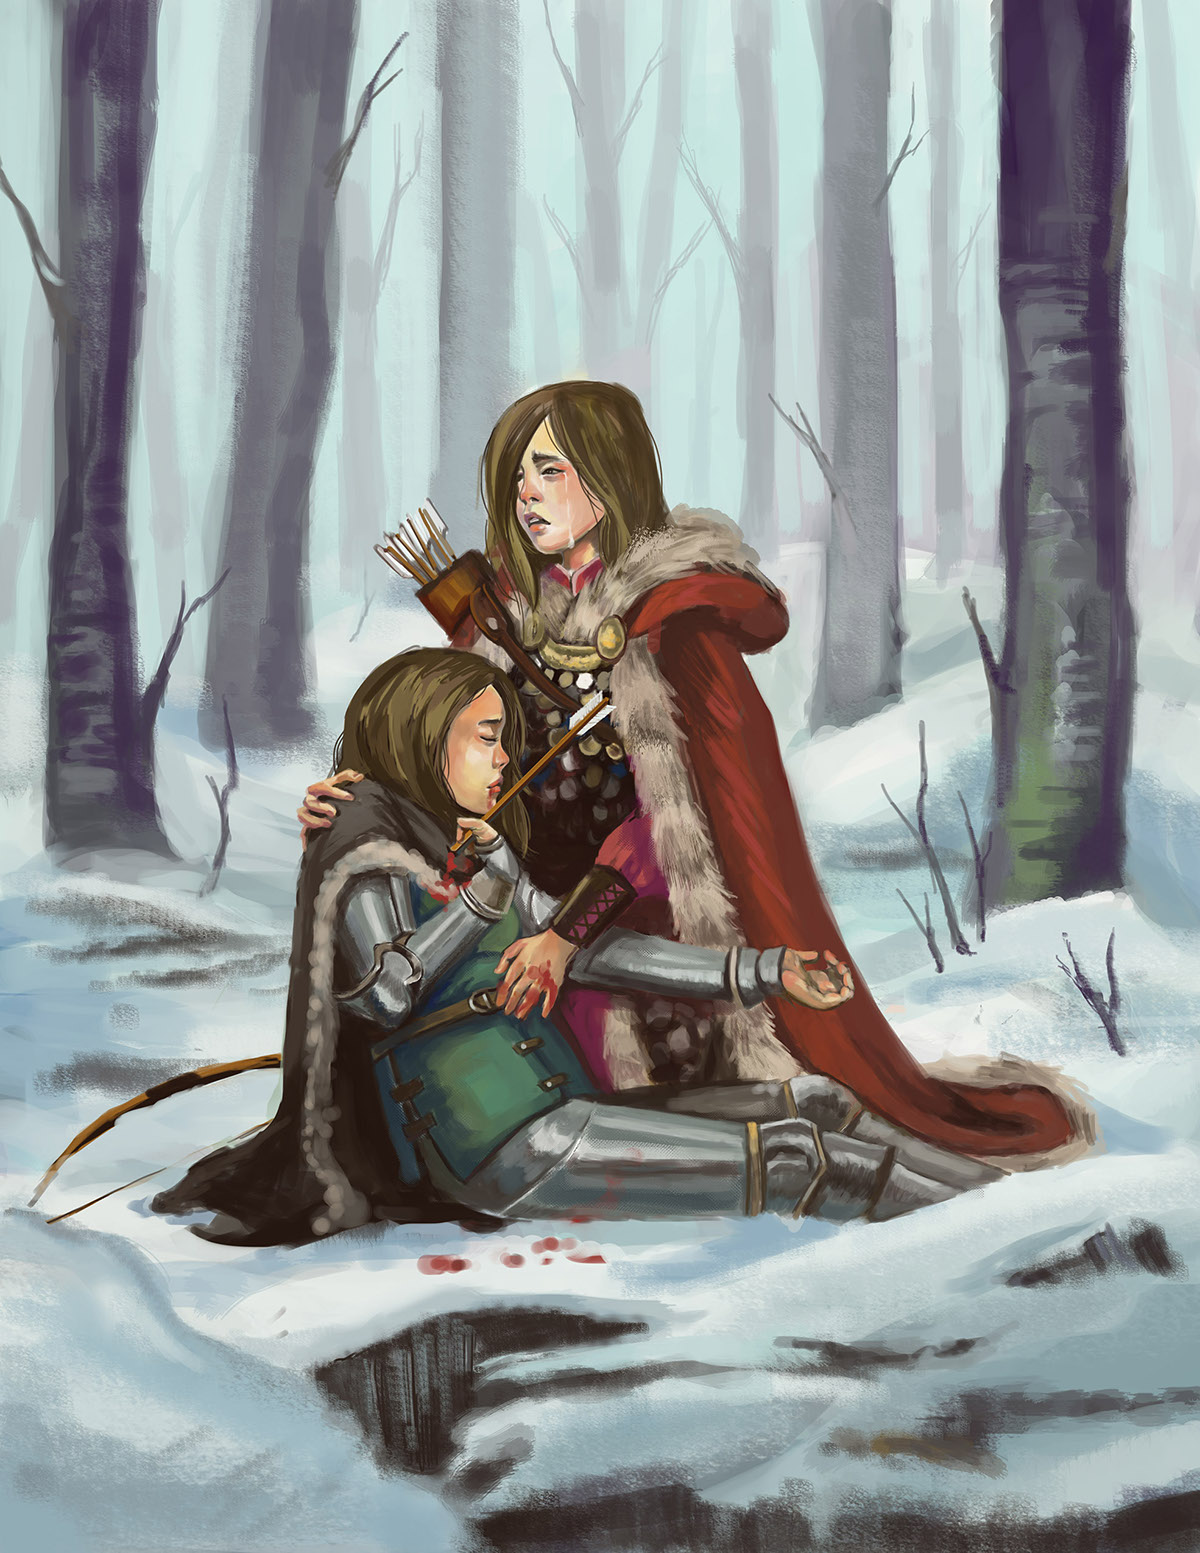 Tragic death story medieval Sisters tale winter